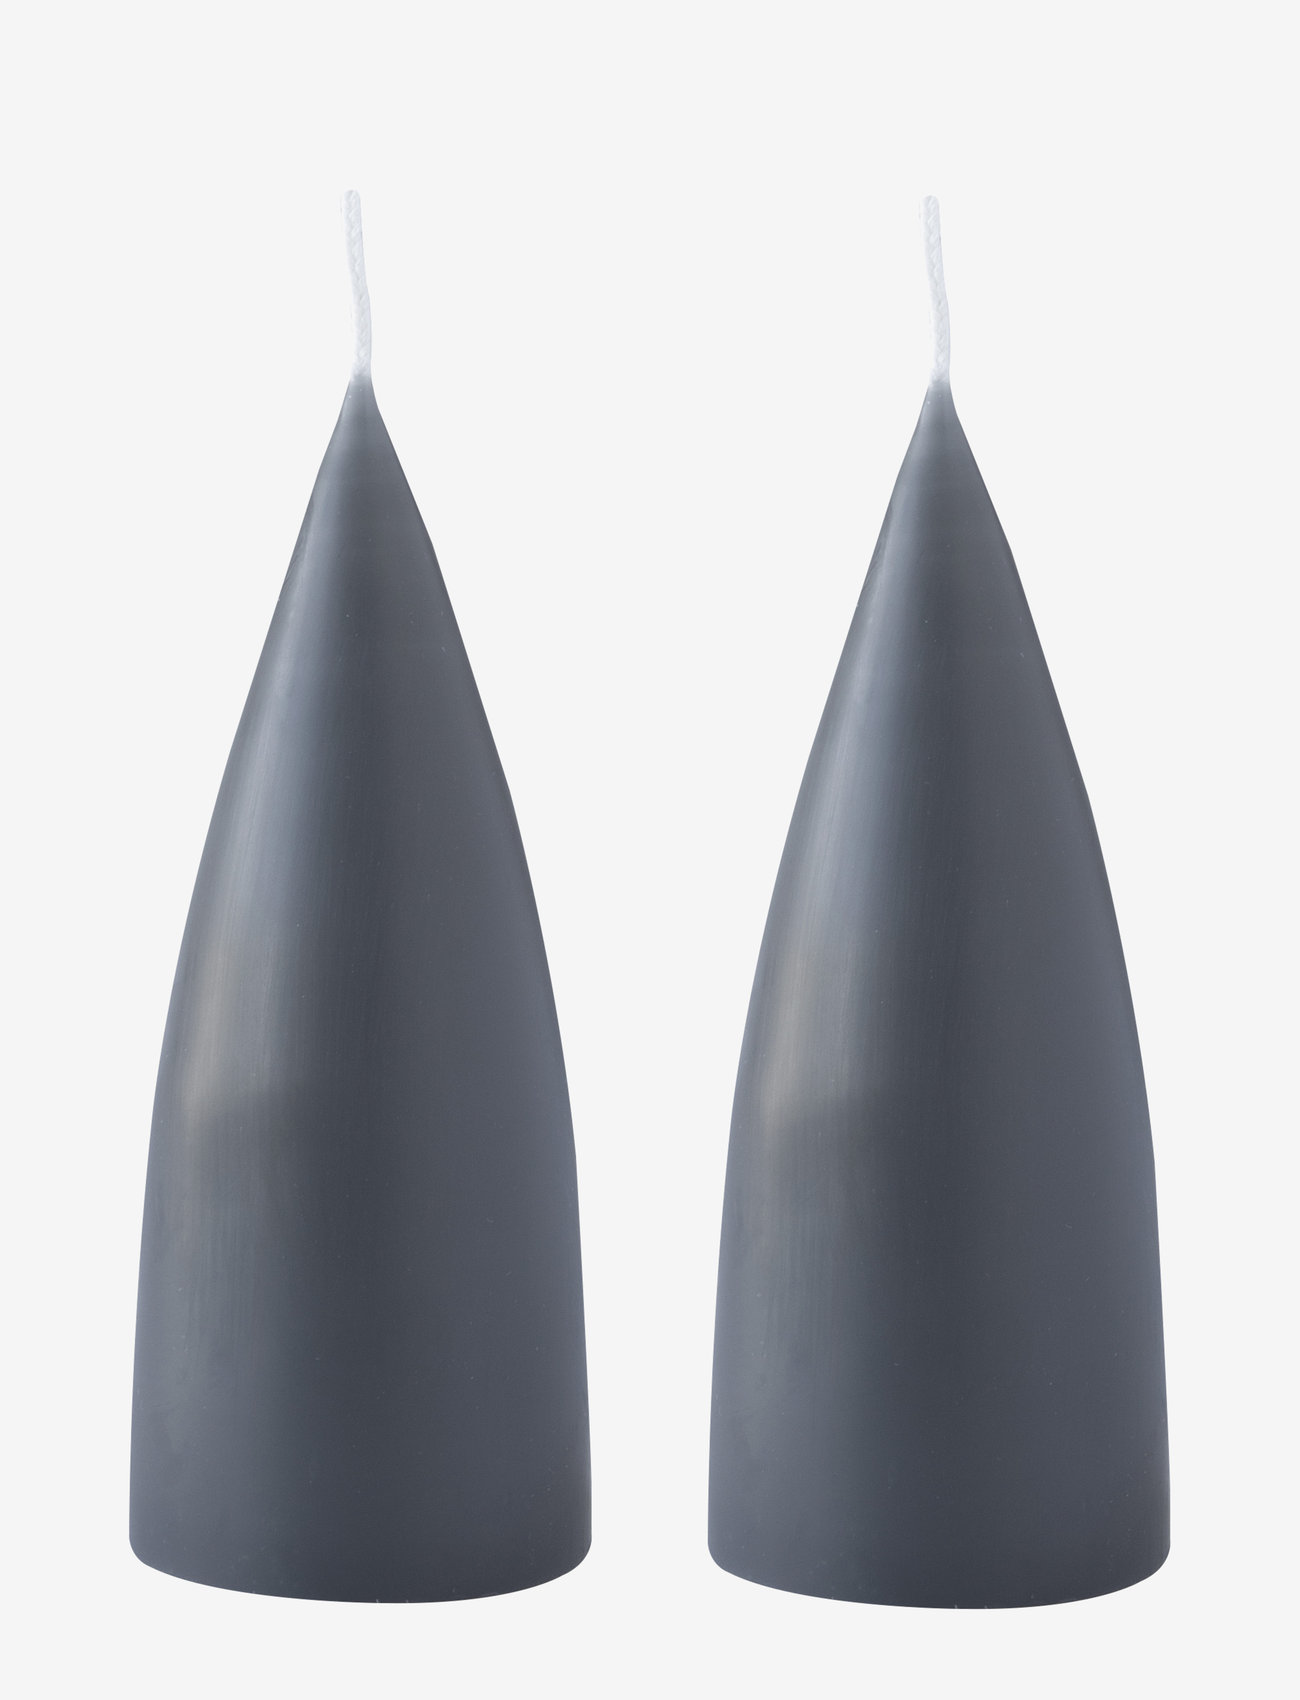 Kunstindustrien - Hand Dipped Cone-Shaped Candles, 2 pack - lowest prices - charcoal grey - 0